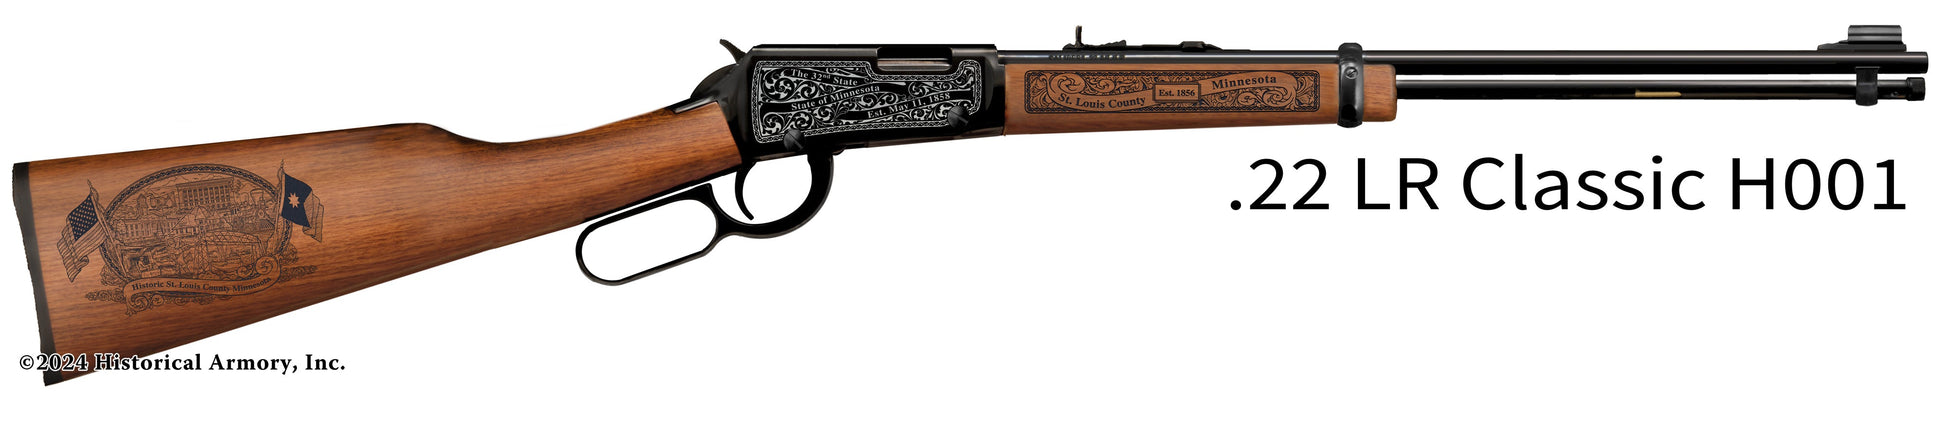 St. Louis County Minnesota Engraved Henry H001 Rifle